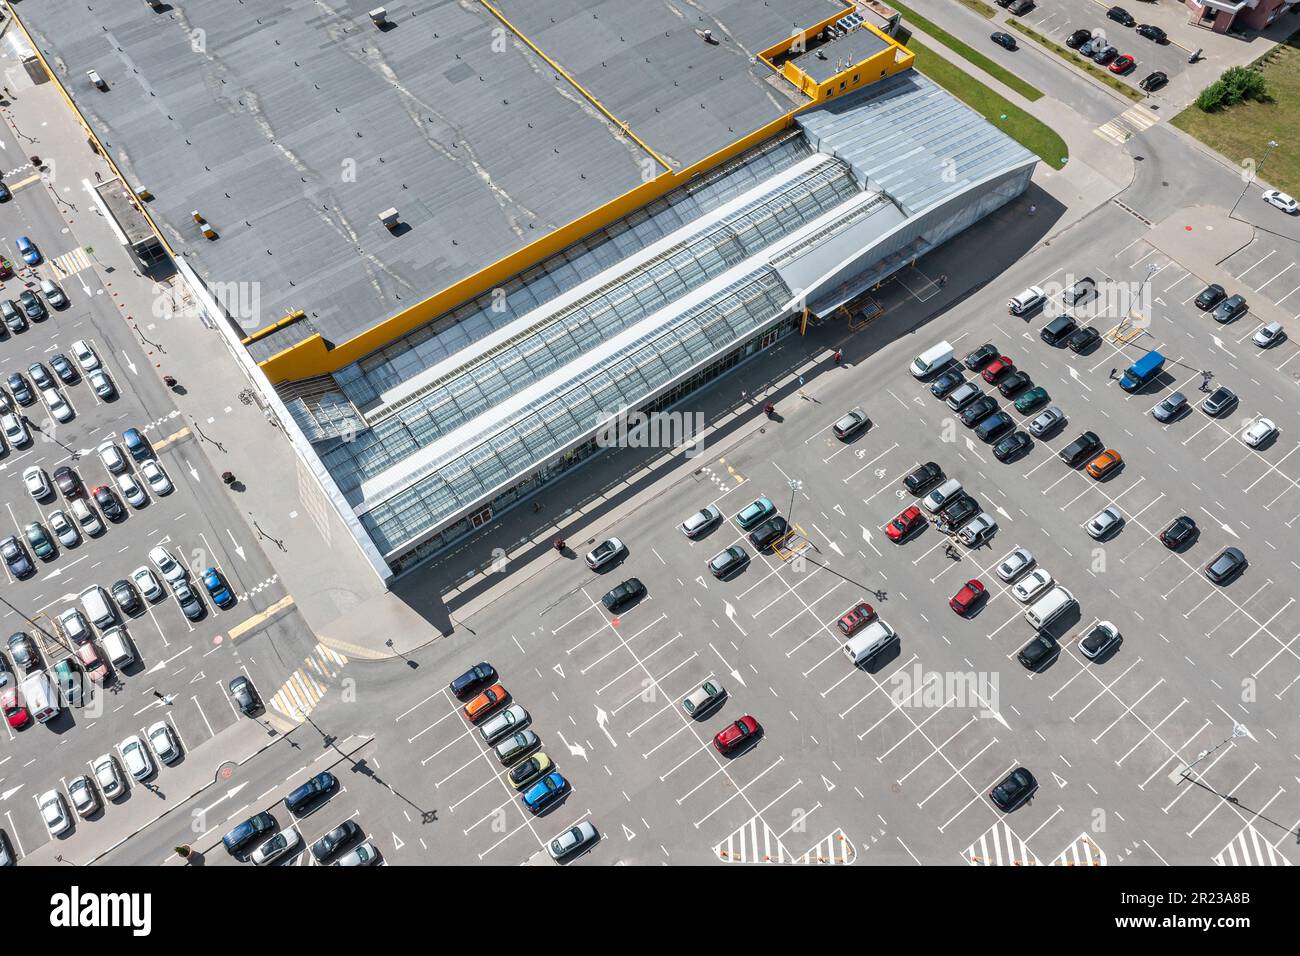 Aventura Shopping Mall Entrance View From The Parking Lot Stock Photo -  Download Image Now - iStock